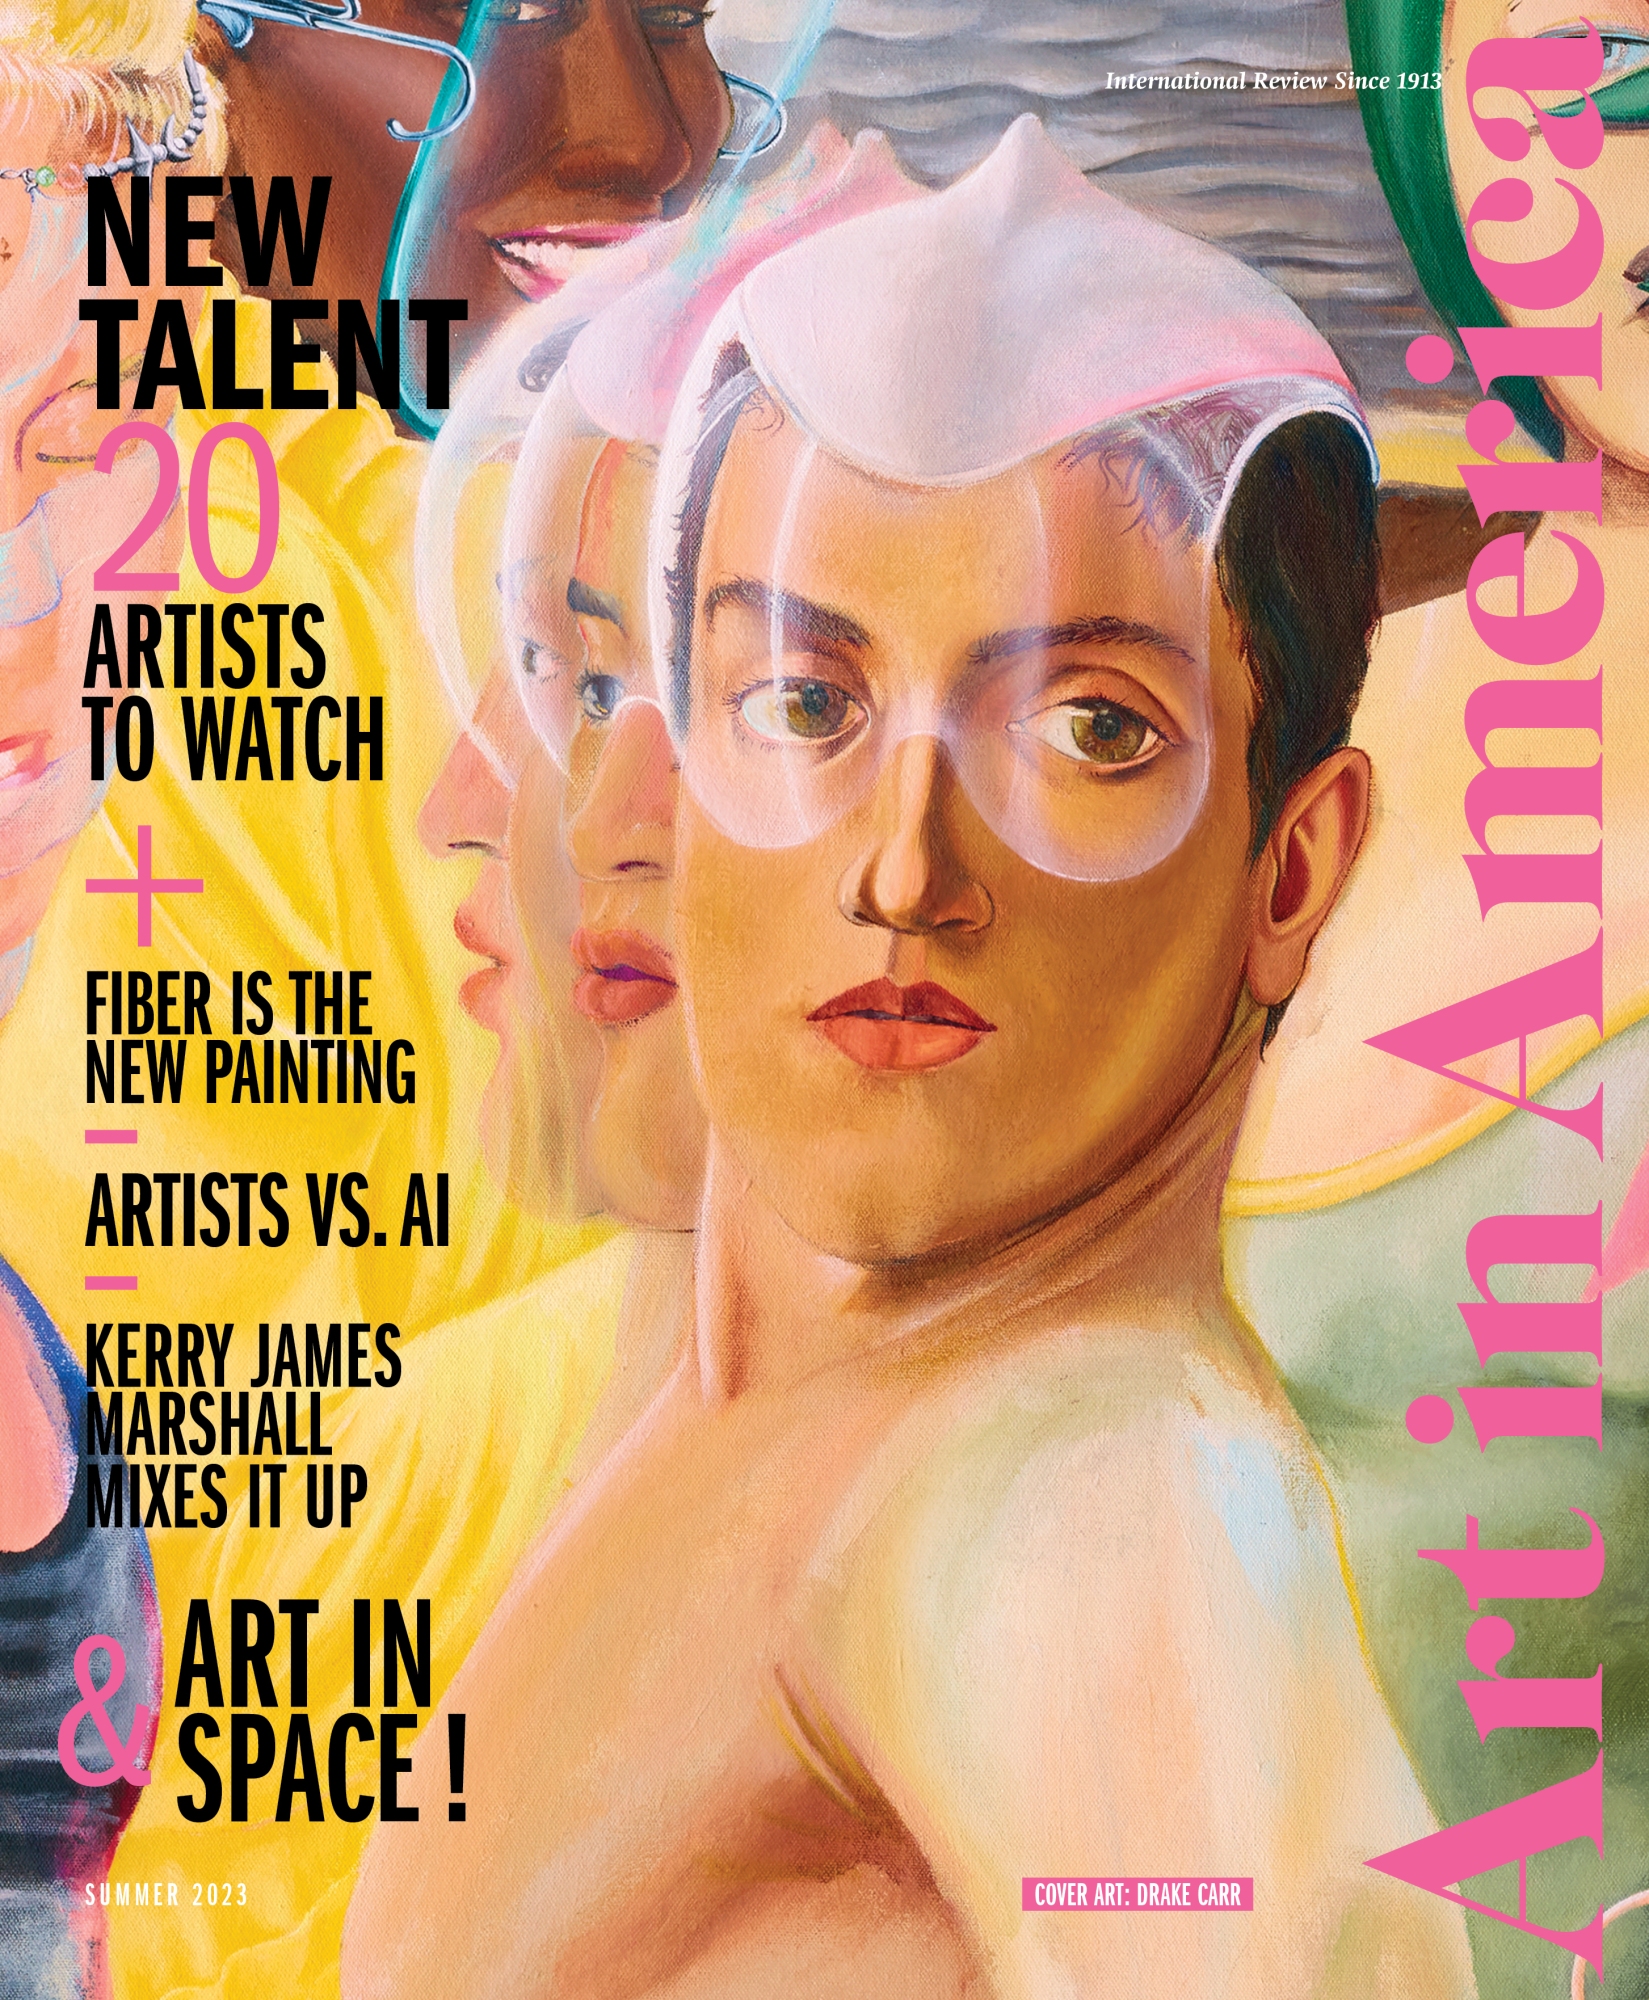 A painting of a person with big brown eyes covered by kind of sheer, blobby veil on the cover of Art in America. Text reads: new talent, 20 artists to watch, fiber is the new painting, artists vs. ai, Kerry James Marshall mixes it up, & art in space.